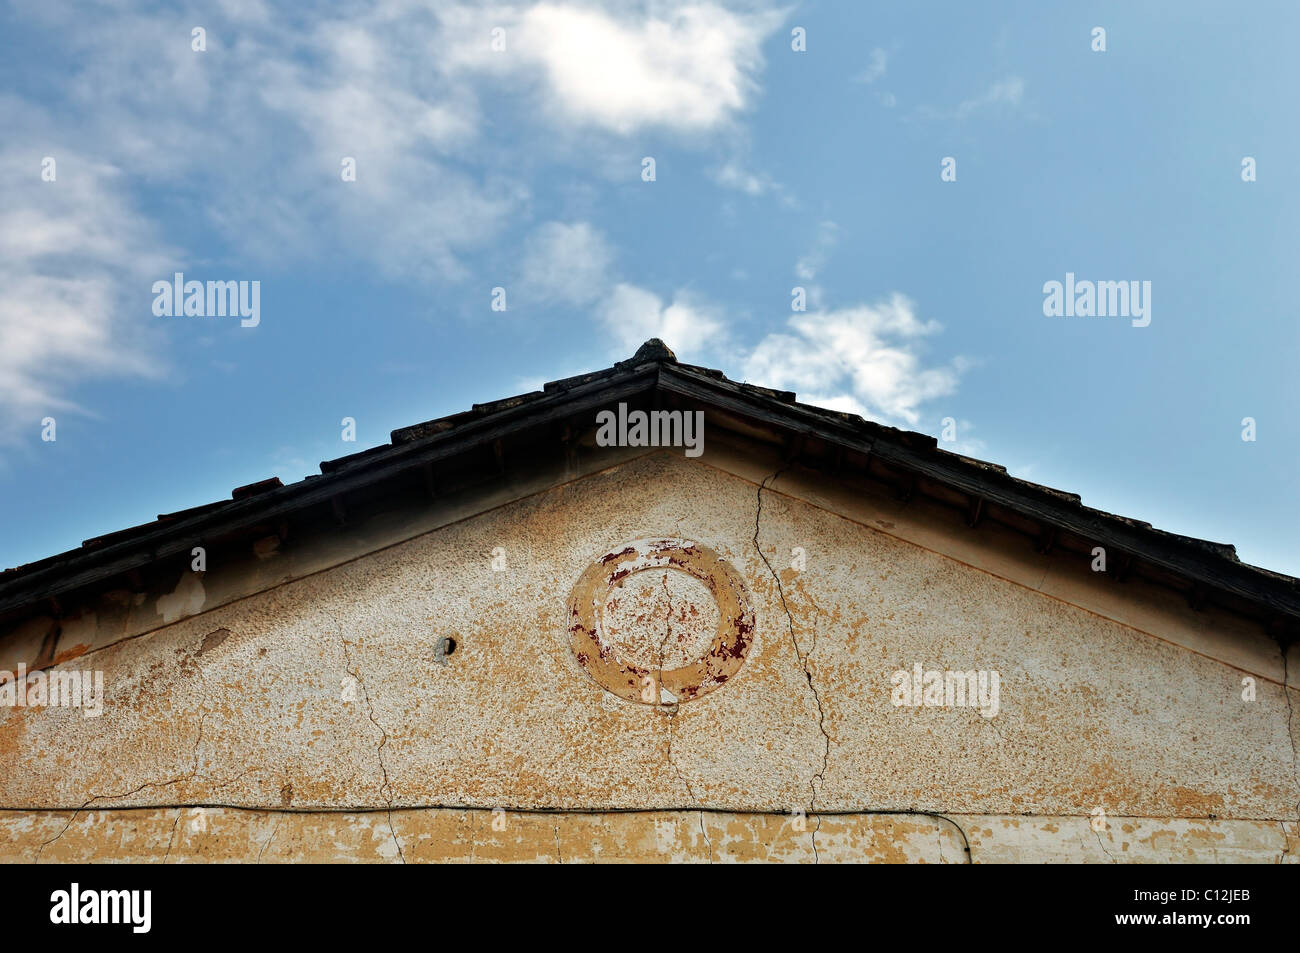 Abandoned neoclassical house roof. Architectural detail. Stock Photo